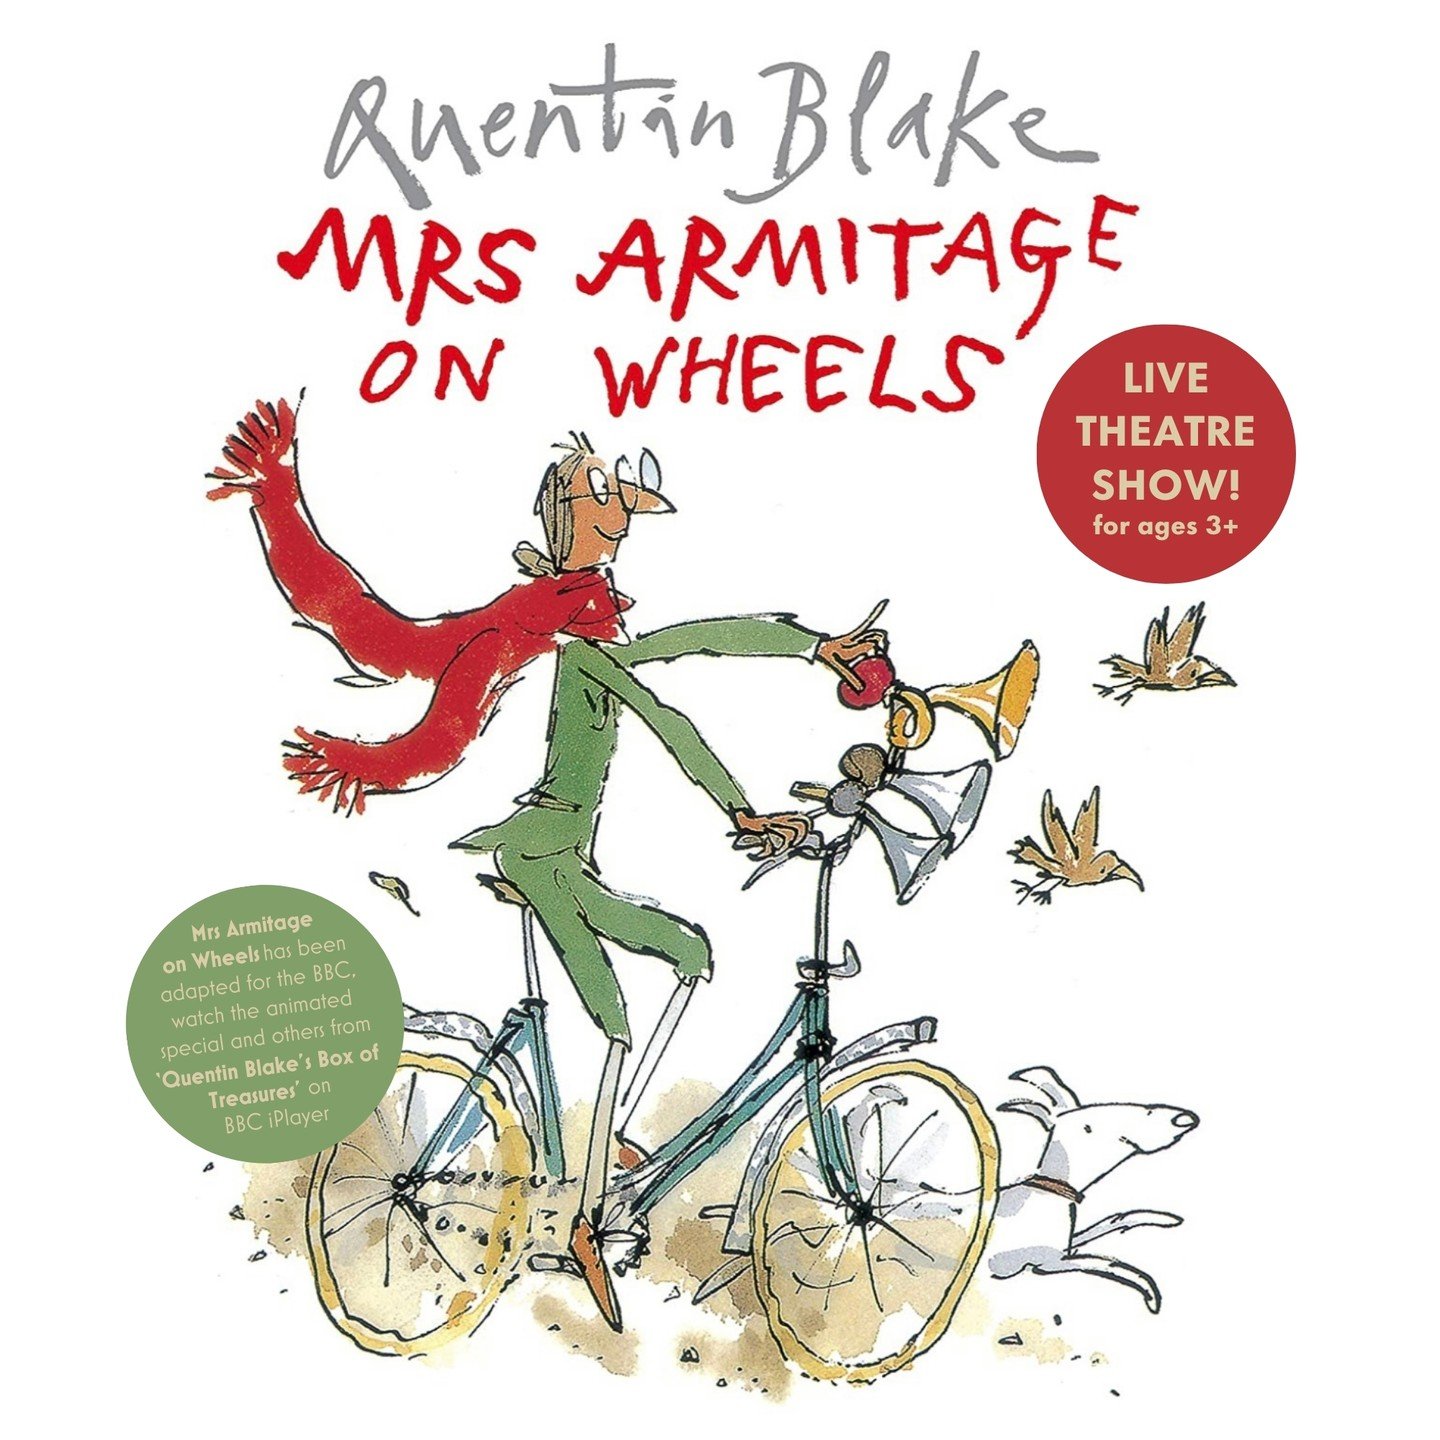 If you could change anything on your bicycle, what would it be? A comfy new saddle? An ice cream maker? Rocket boosters?!

When Mrs Armitage goes out for a ride with her trusty dog Breakspear, she decides her bicycle needs improvement. With a new hor